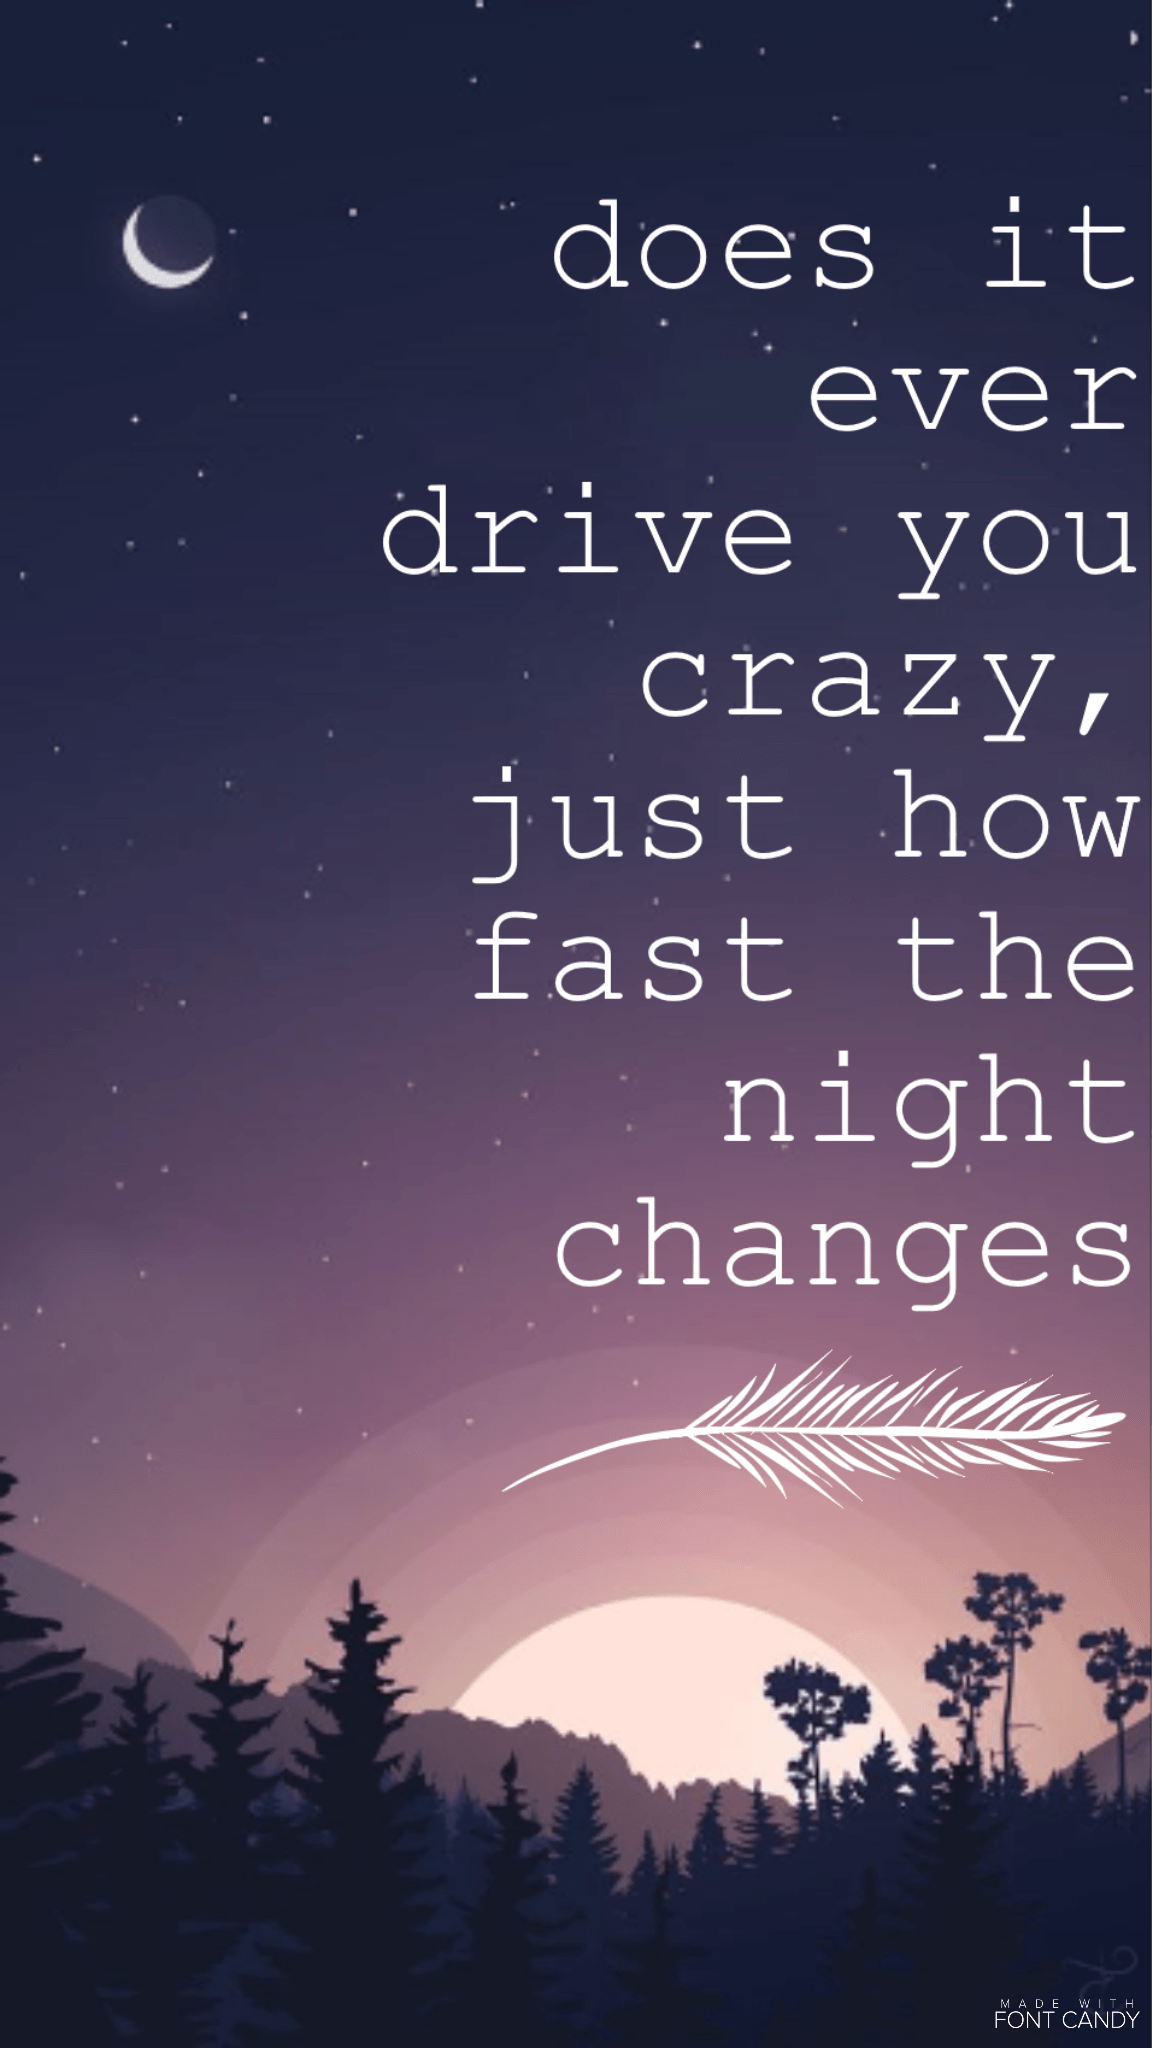 night changes #onedirection. Wallpaper iphone quotes songs, One direction lyrics, Song lyrics one direction